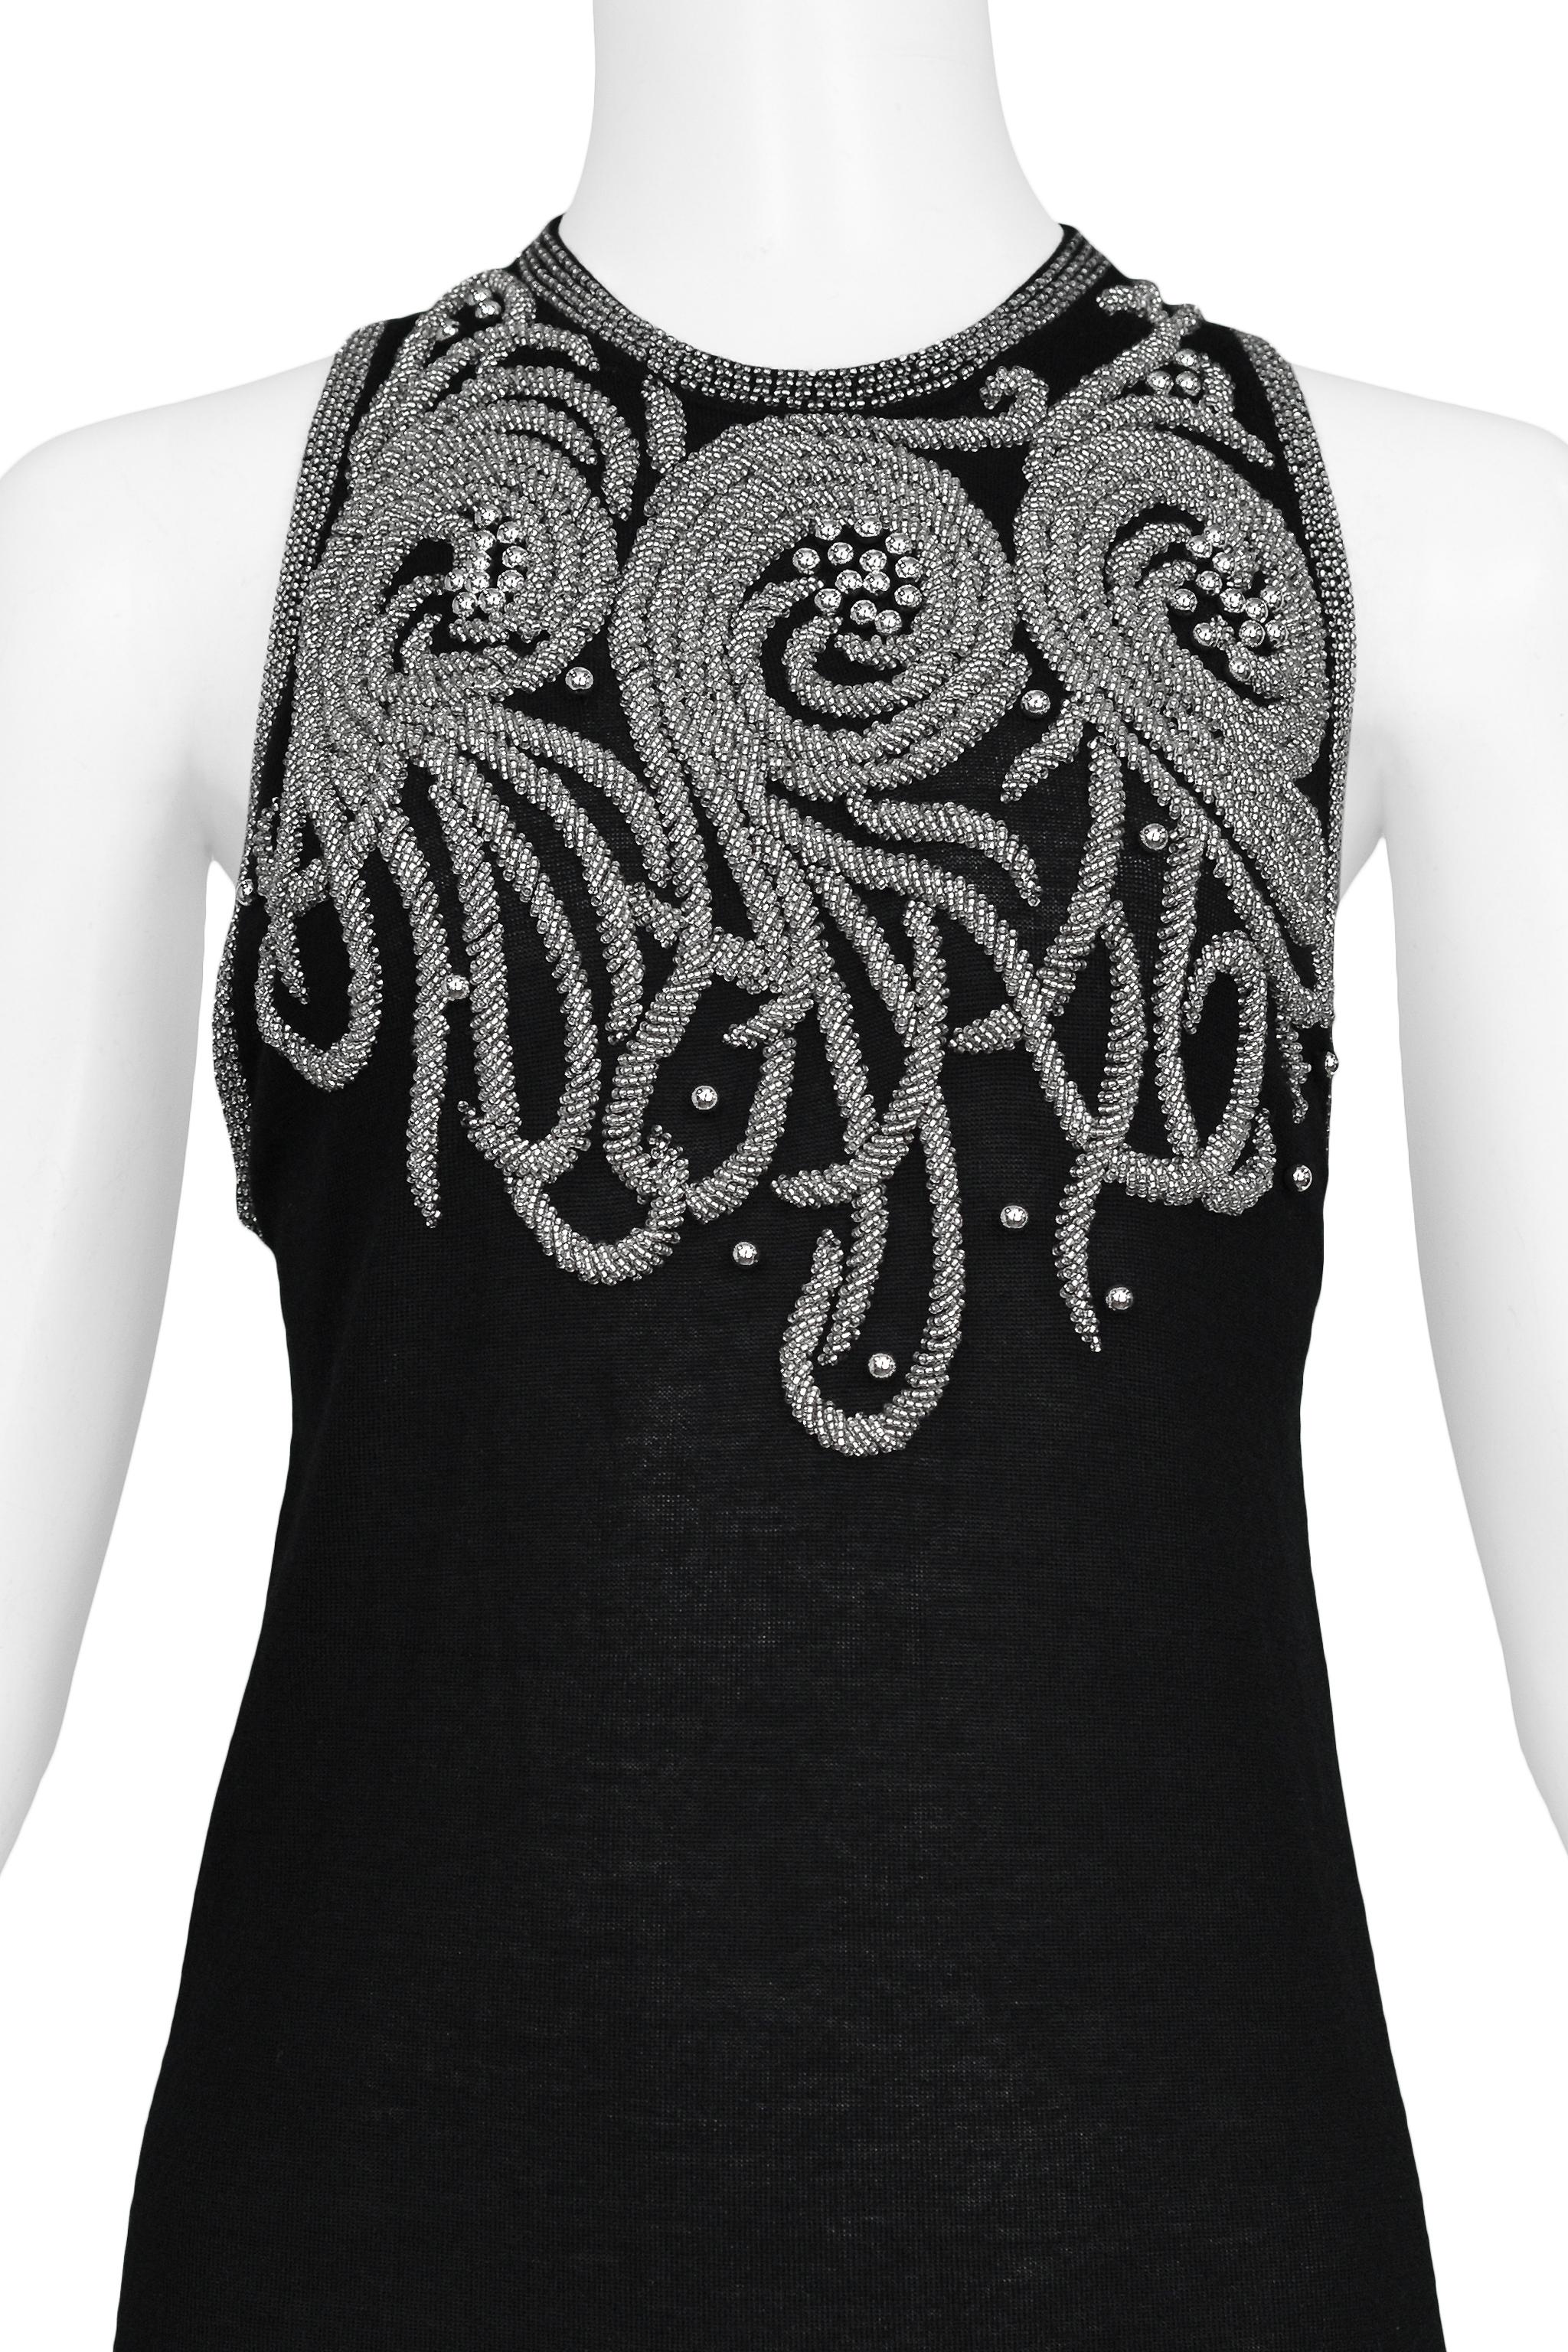 Balenciaga Black Knit Top With Silver Beading In Excellent Condition For Sale In Los Angeles, CA